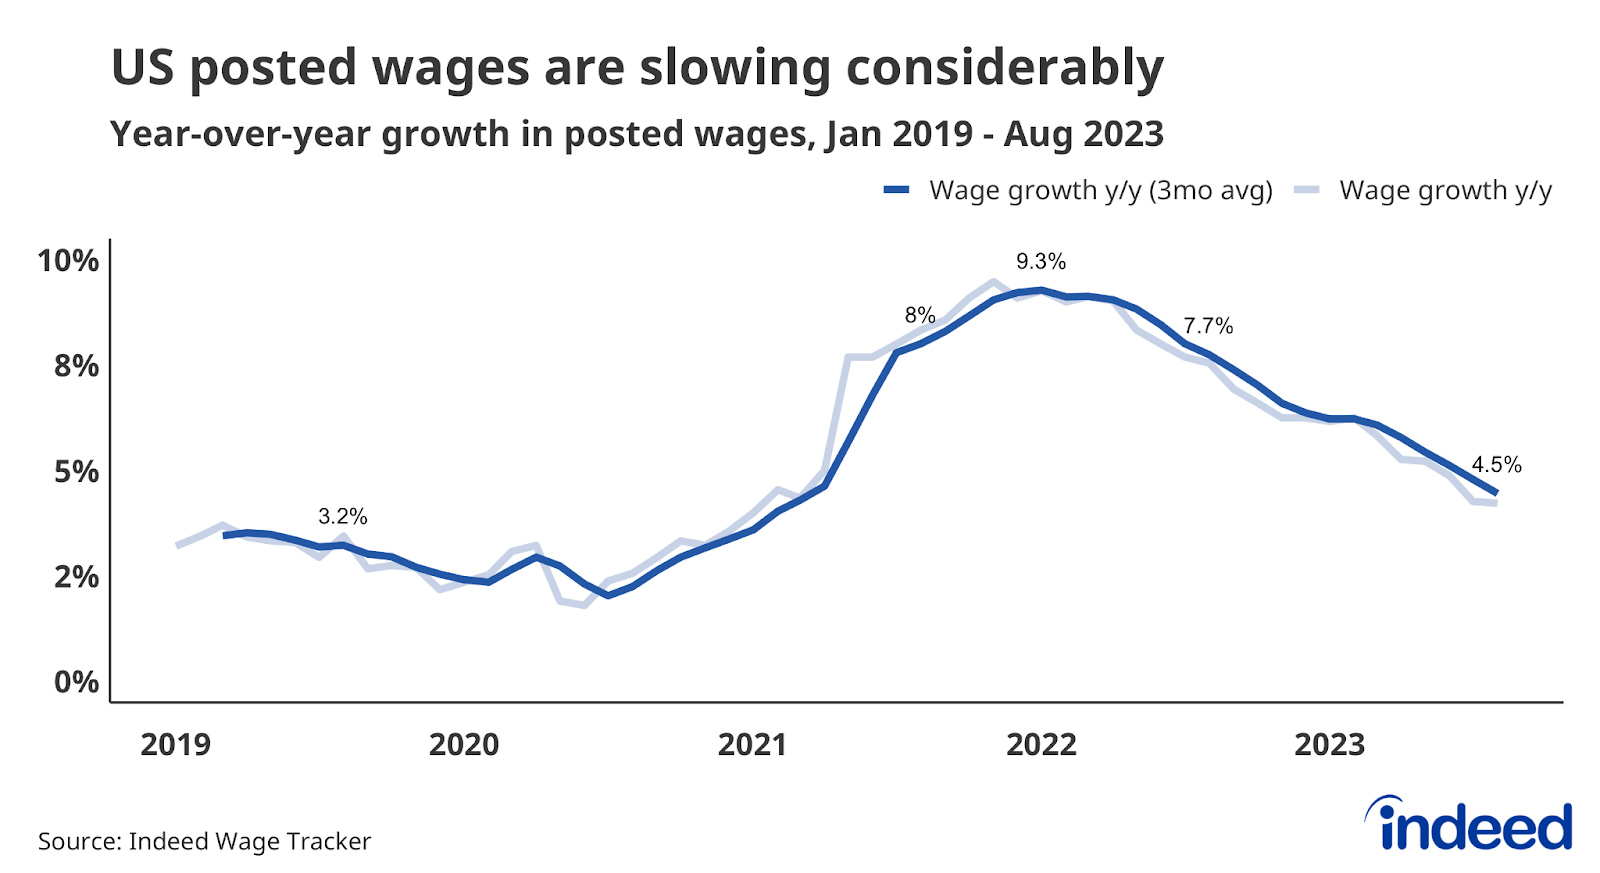 Line graph titled “US posted wages are slowing considerably” with a vertical axis from 0% to 10%. The graph covers from January 2019 to August 2023. It shows posted wage growth rising quickly through most of 2021 before peaking in January 2022 and declining through August 2023.